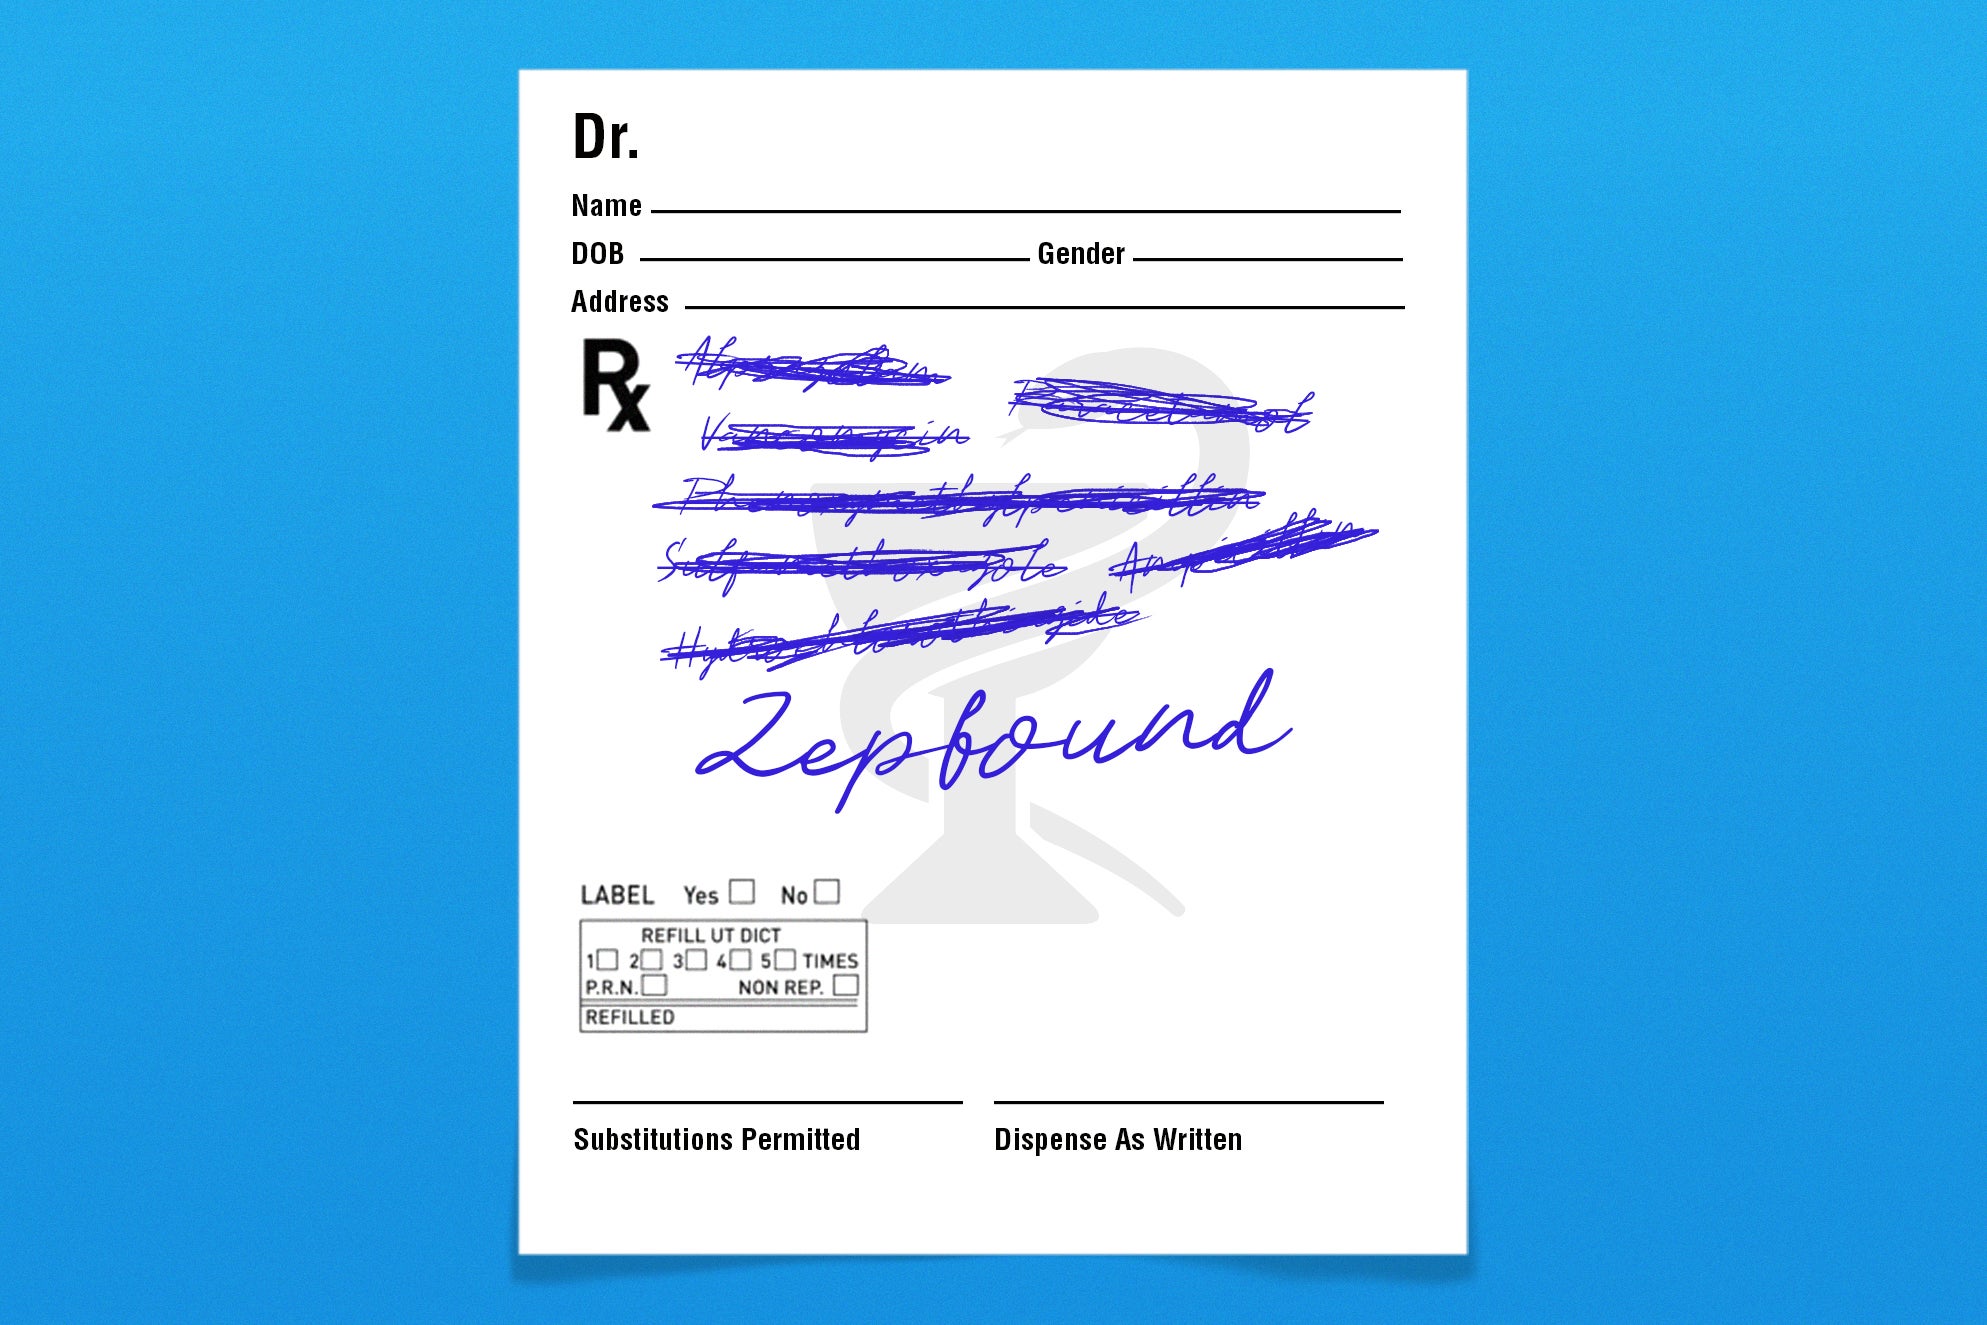 A prescription slip with names scratched out, except for Zepbound.